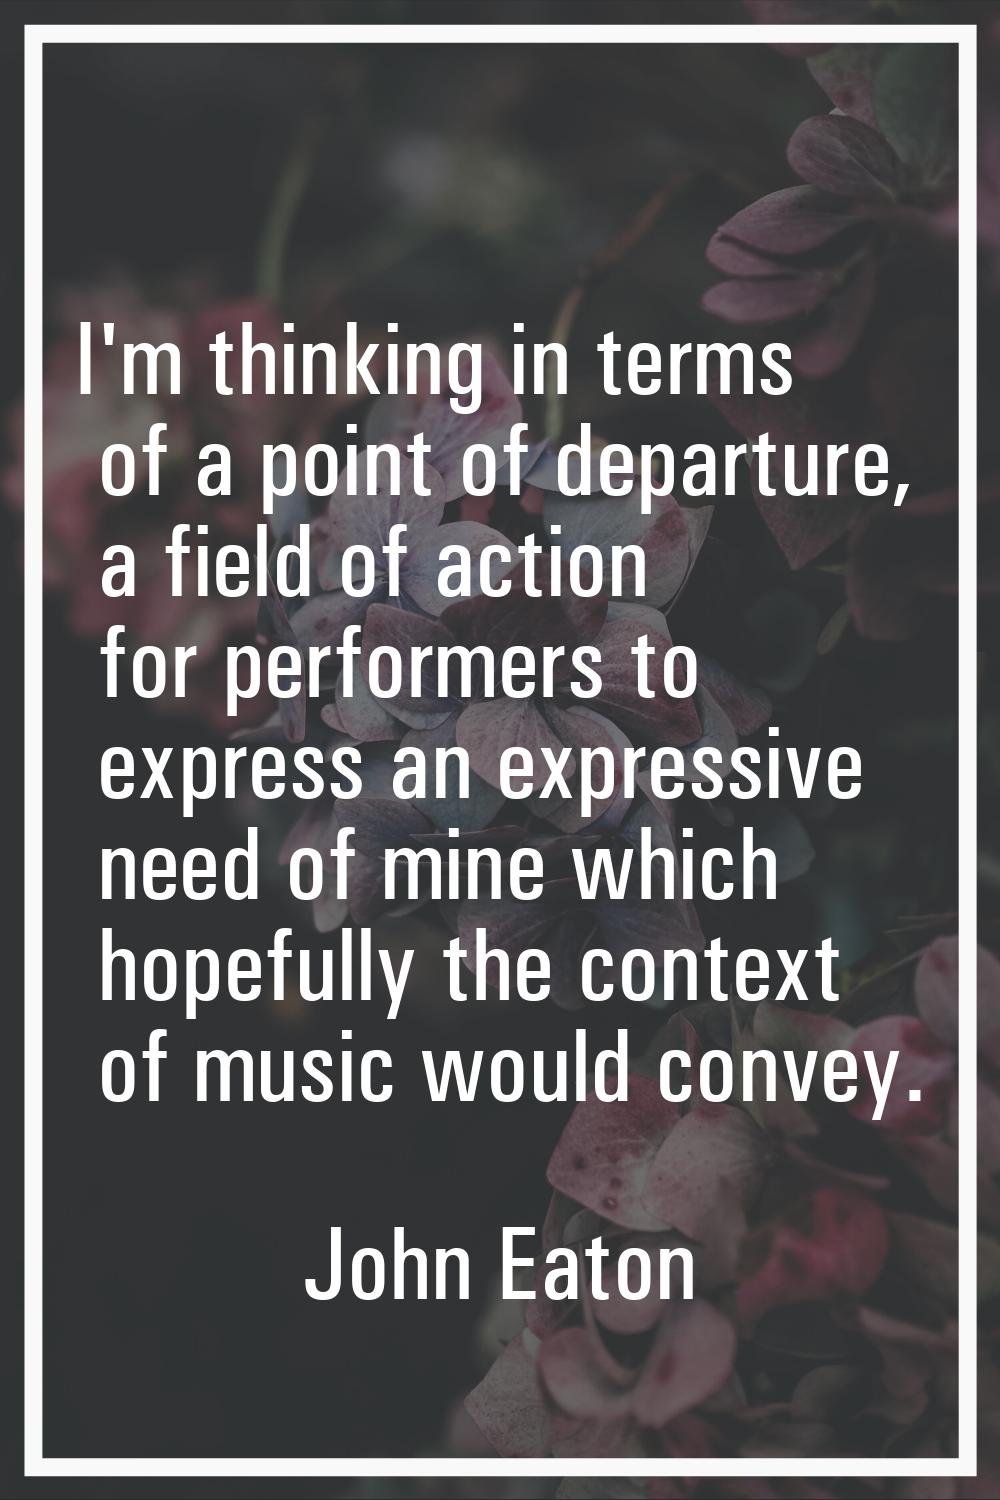 I'm thinking in terms of a point of departure, a field of action for performers to express an expre